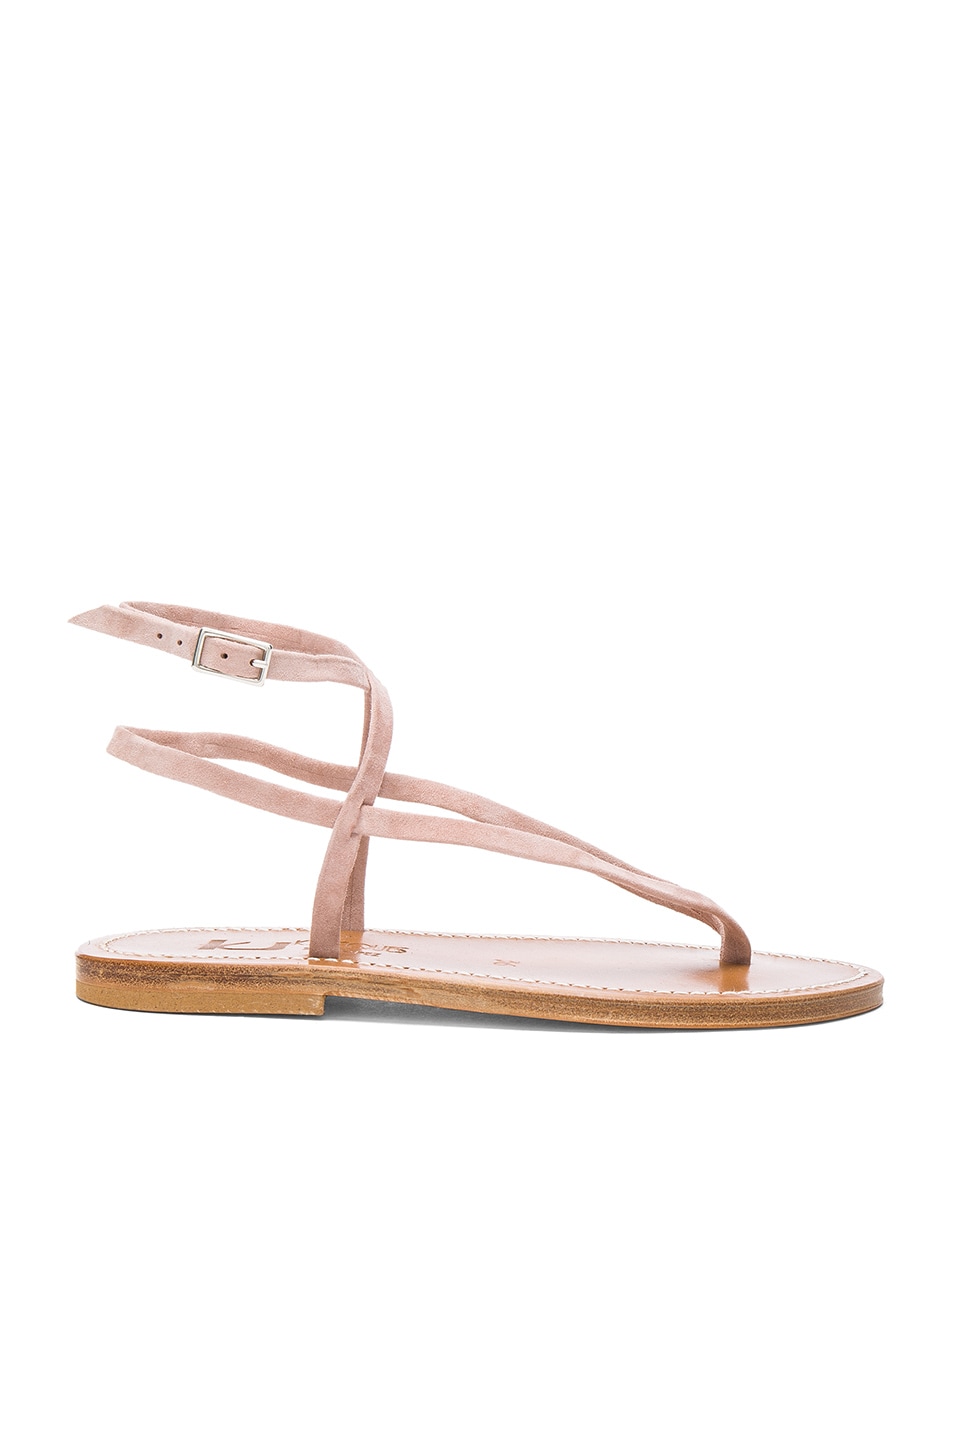 Image 1 of K Jacques Suede Delta Sandals in Suede Rosa Palo